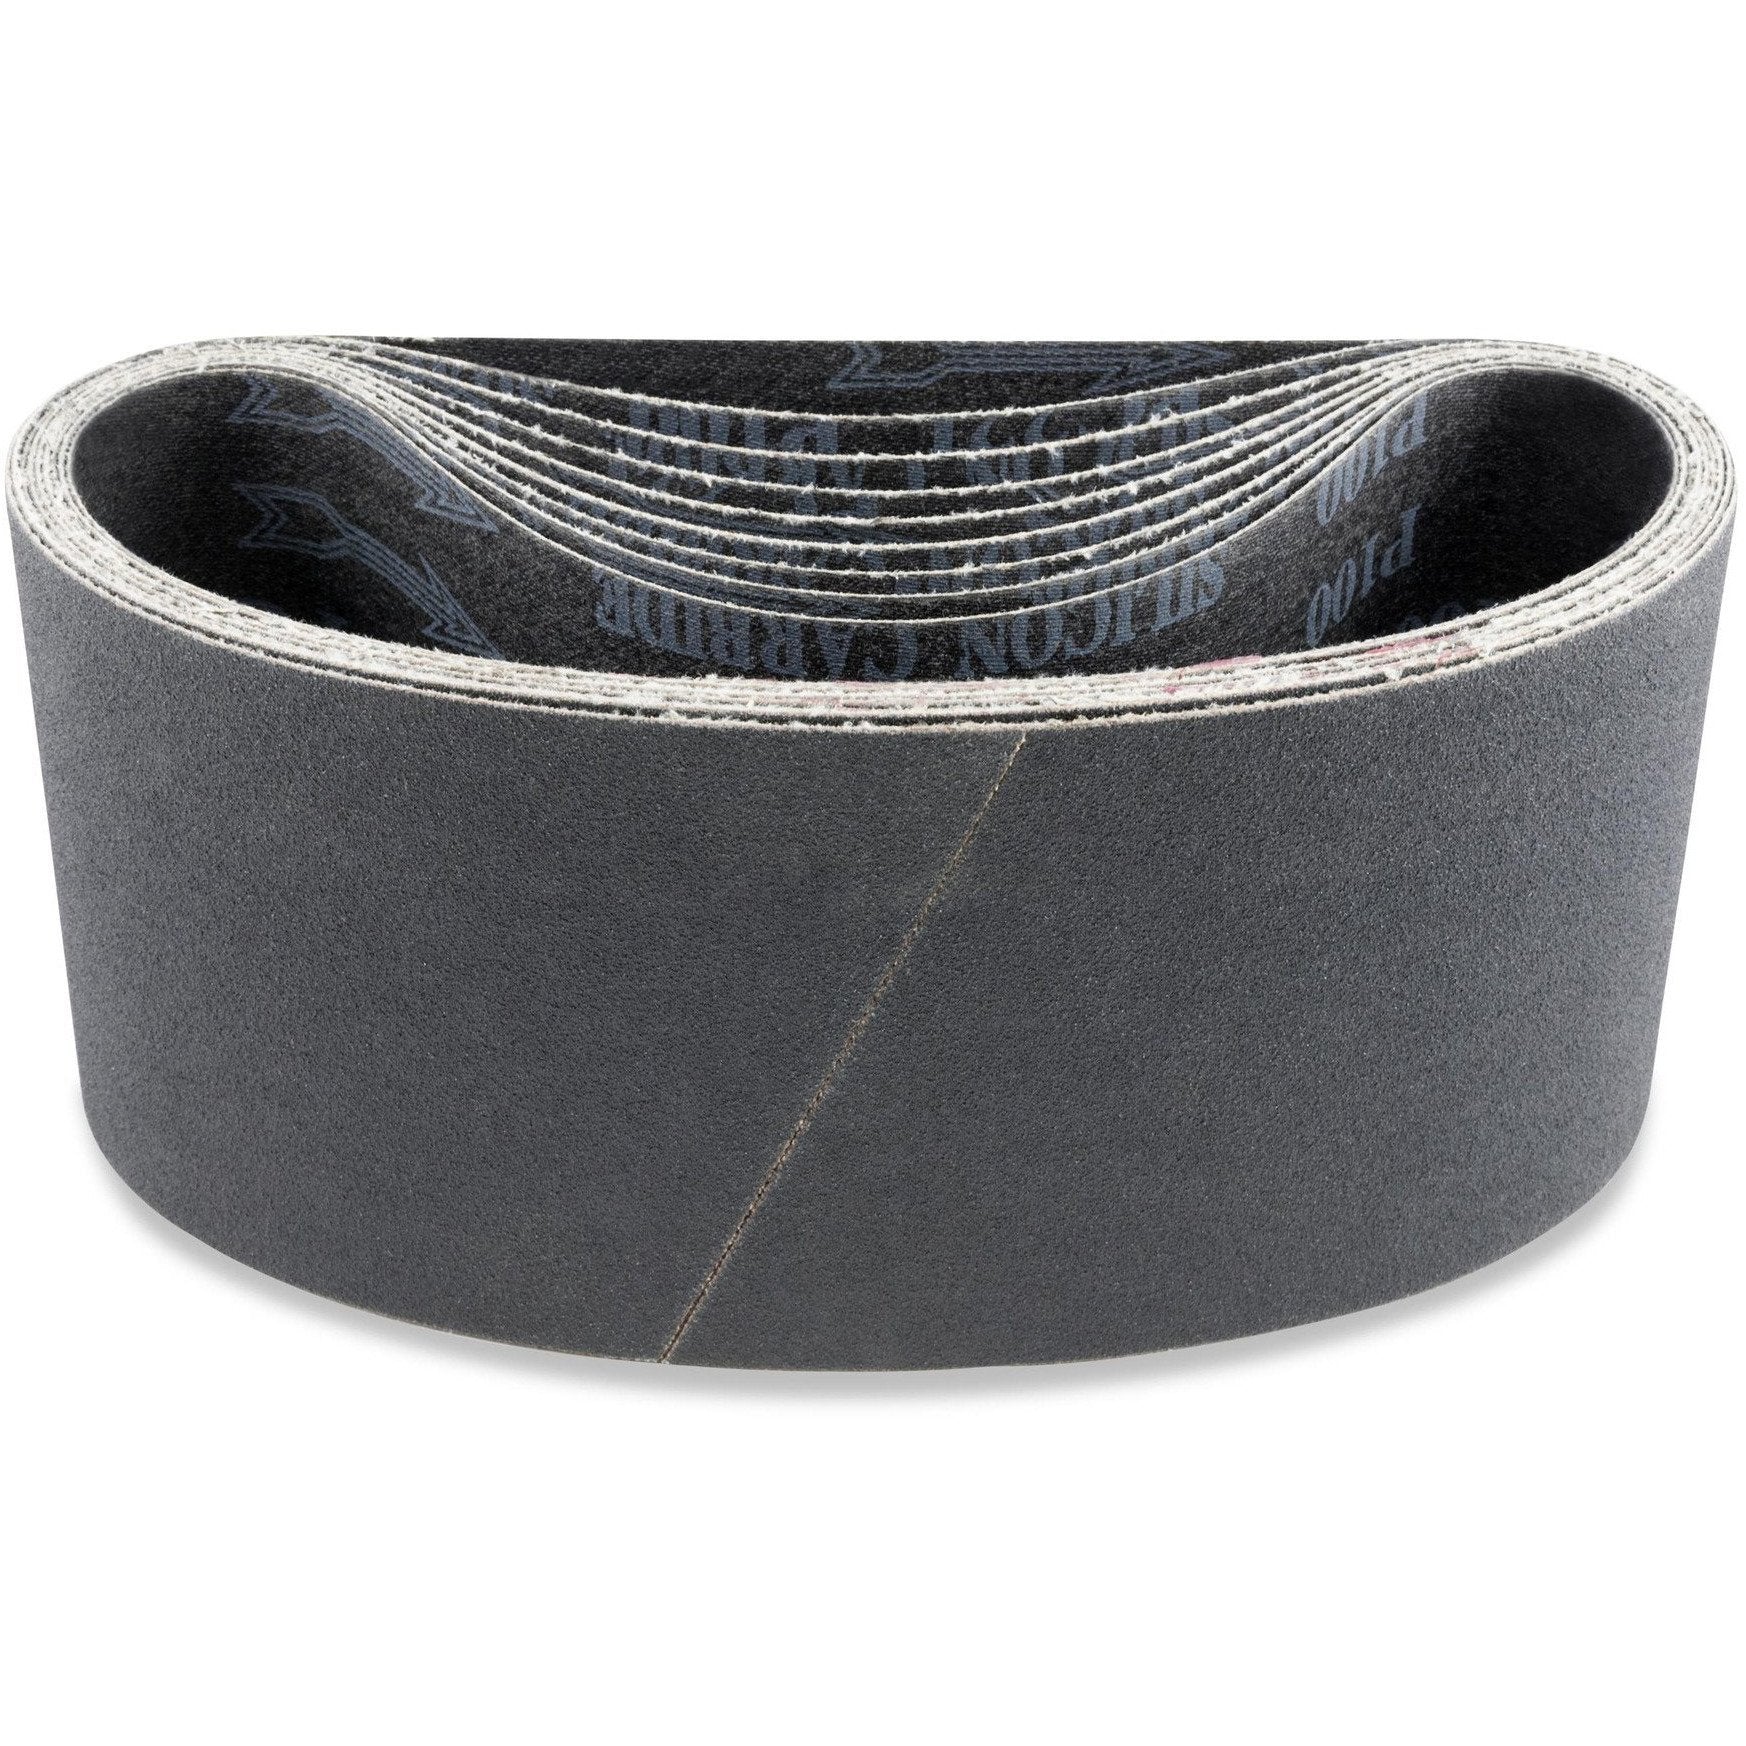 2 1/2 X 16 Inch Industrial Grade Silicon Carbide Sanding Belts, 6 Pack - Red Label Abrasives